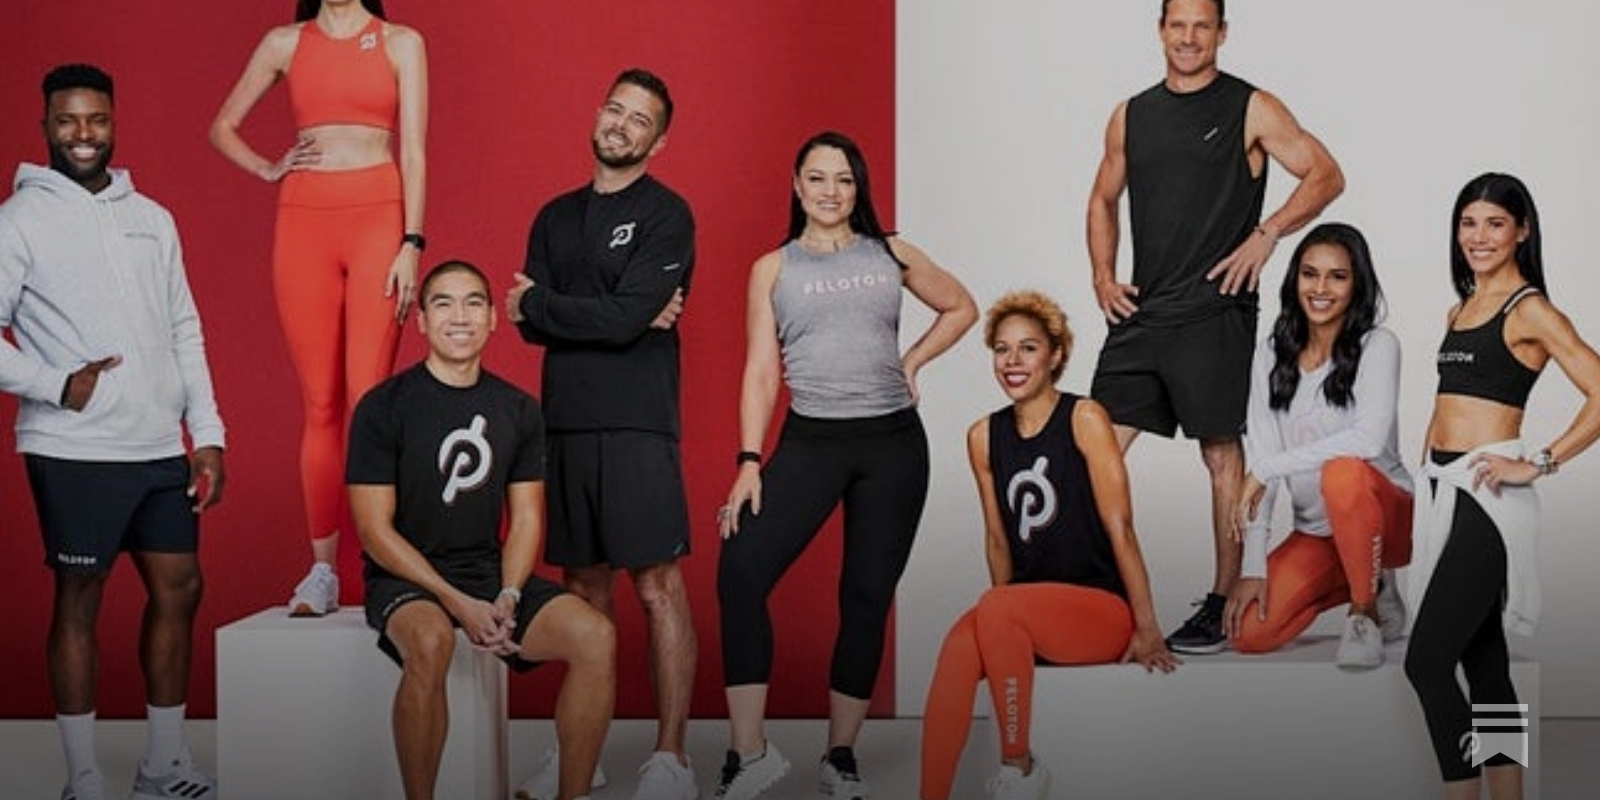 An extension of the brand': Inside Peloton's apparel ambitions - Glossy